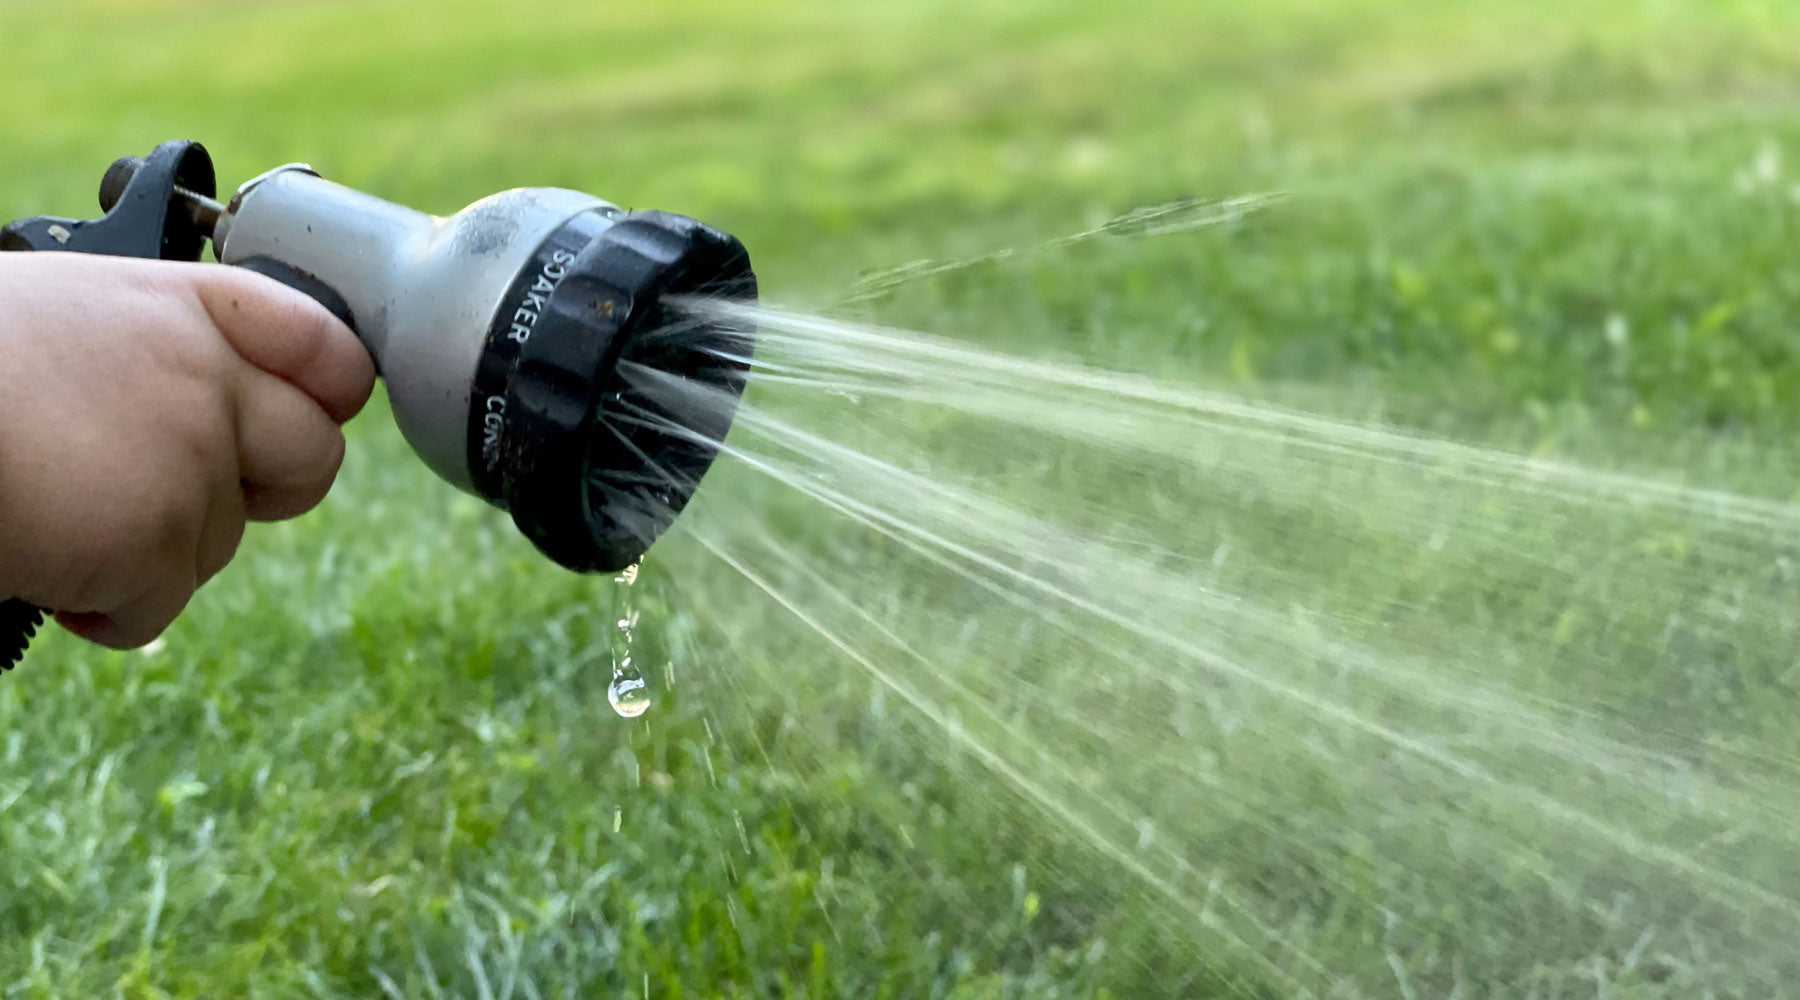 What is the best garden hose sprayer? [Expert Recommendations]